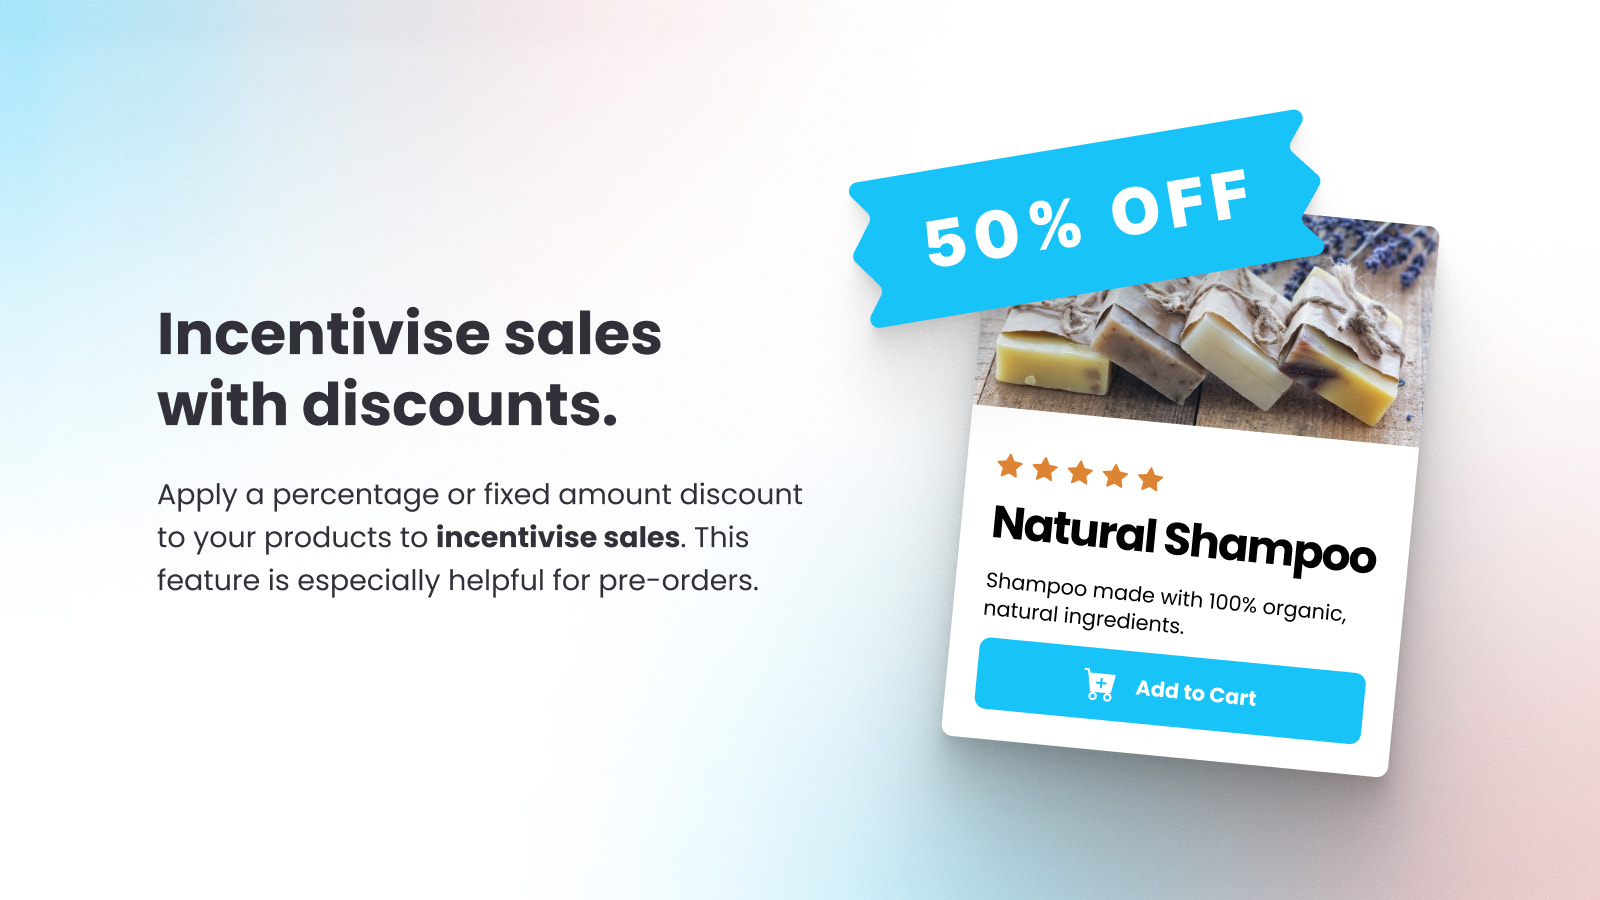 Use discounts to incentivise sales